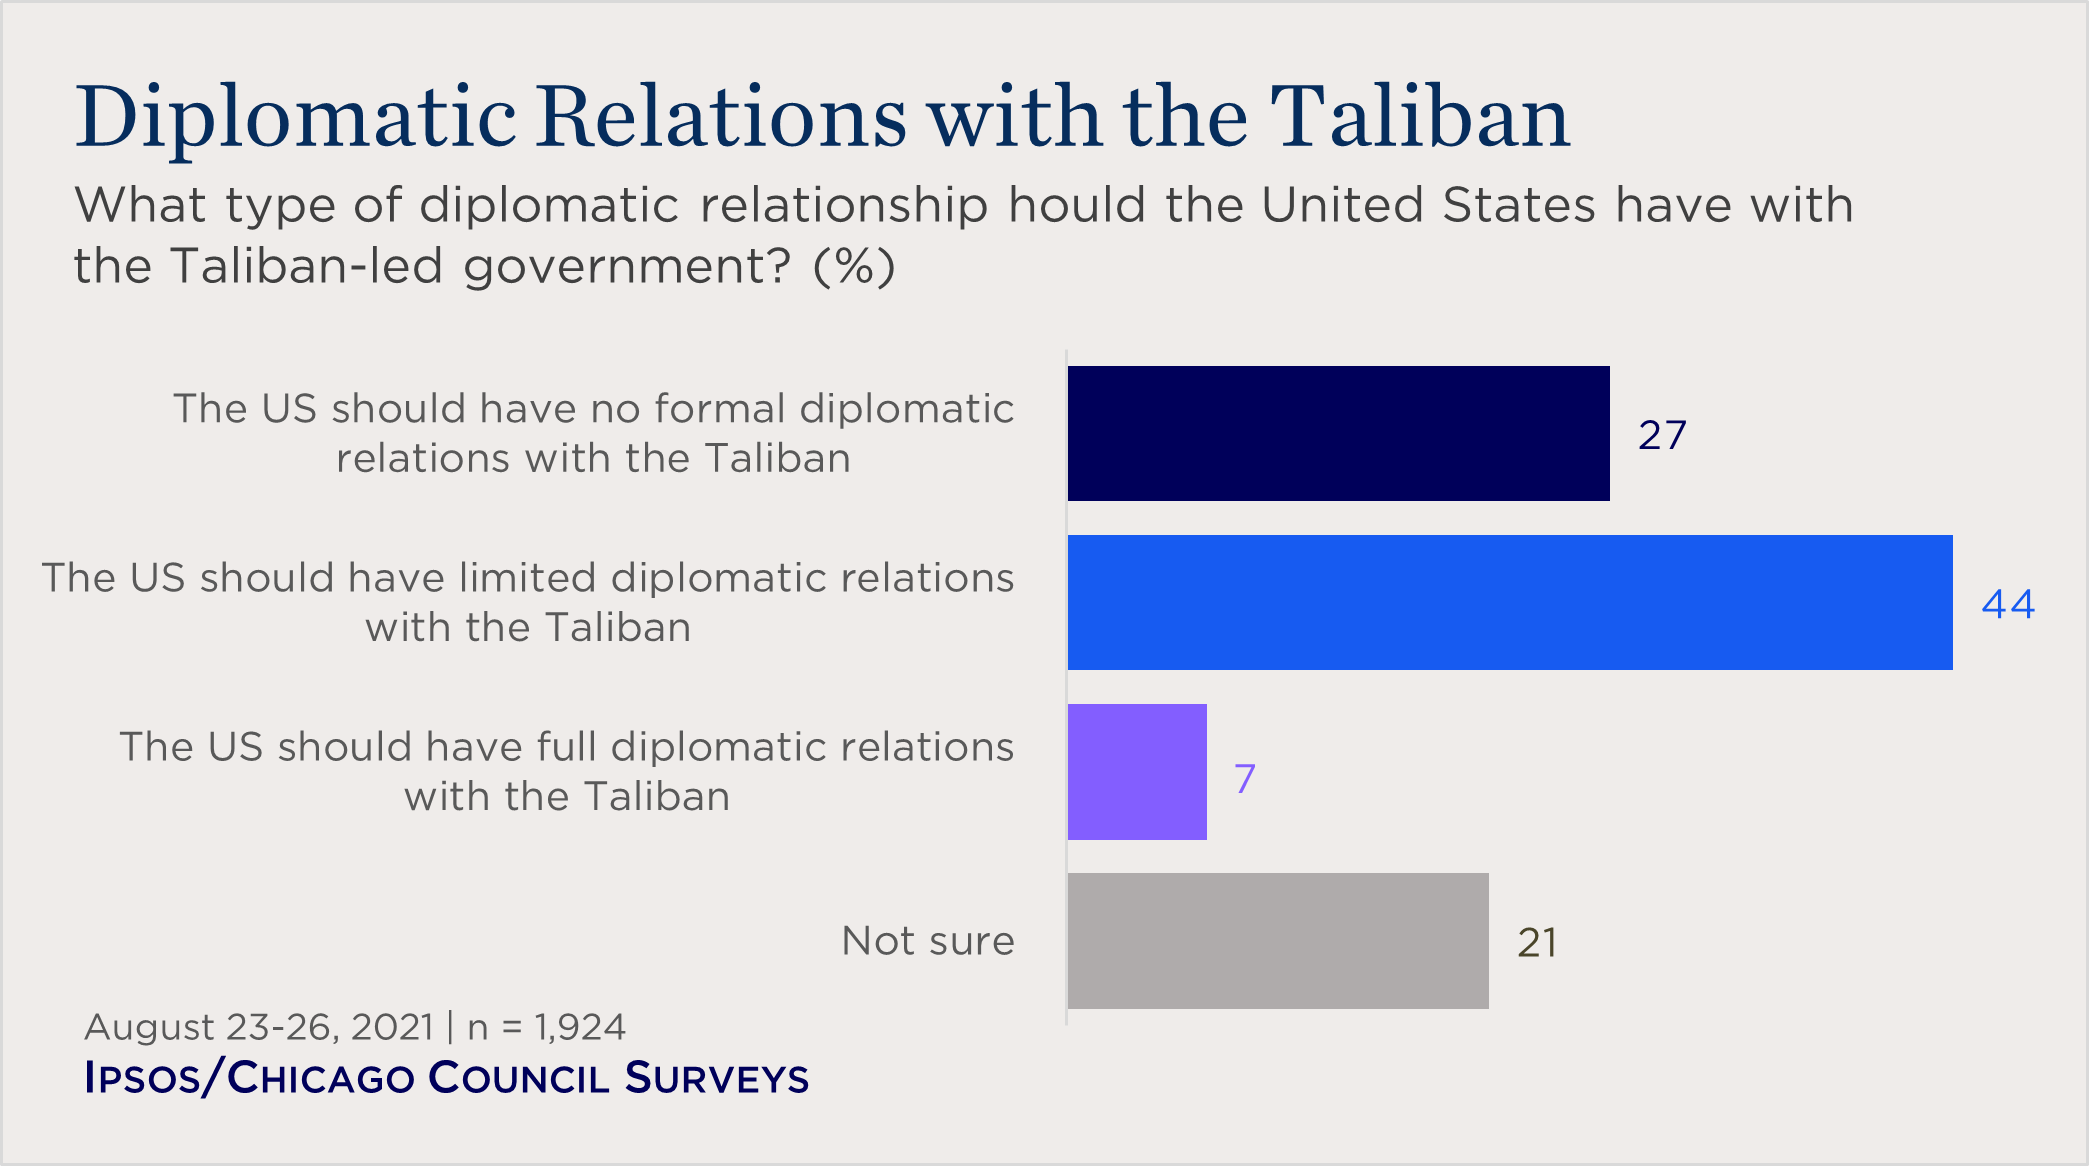 "bar chart showing views on a US diplomatic relationship with the Taliban"